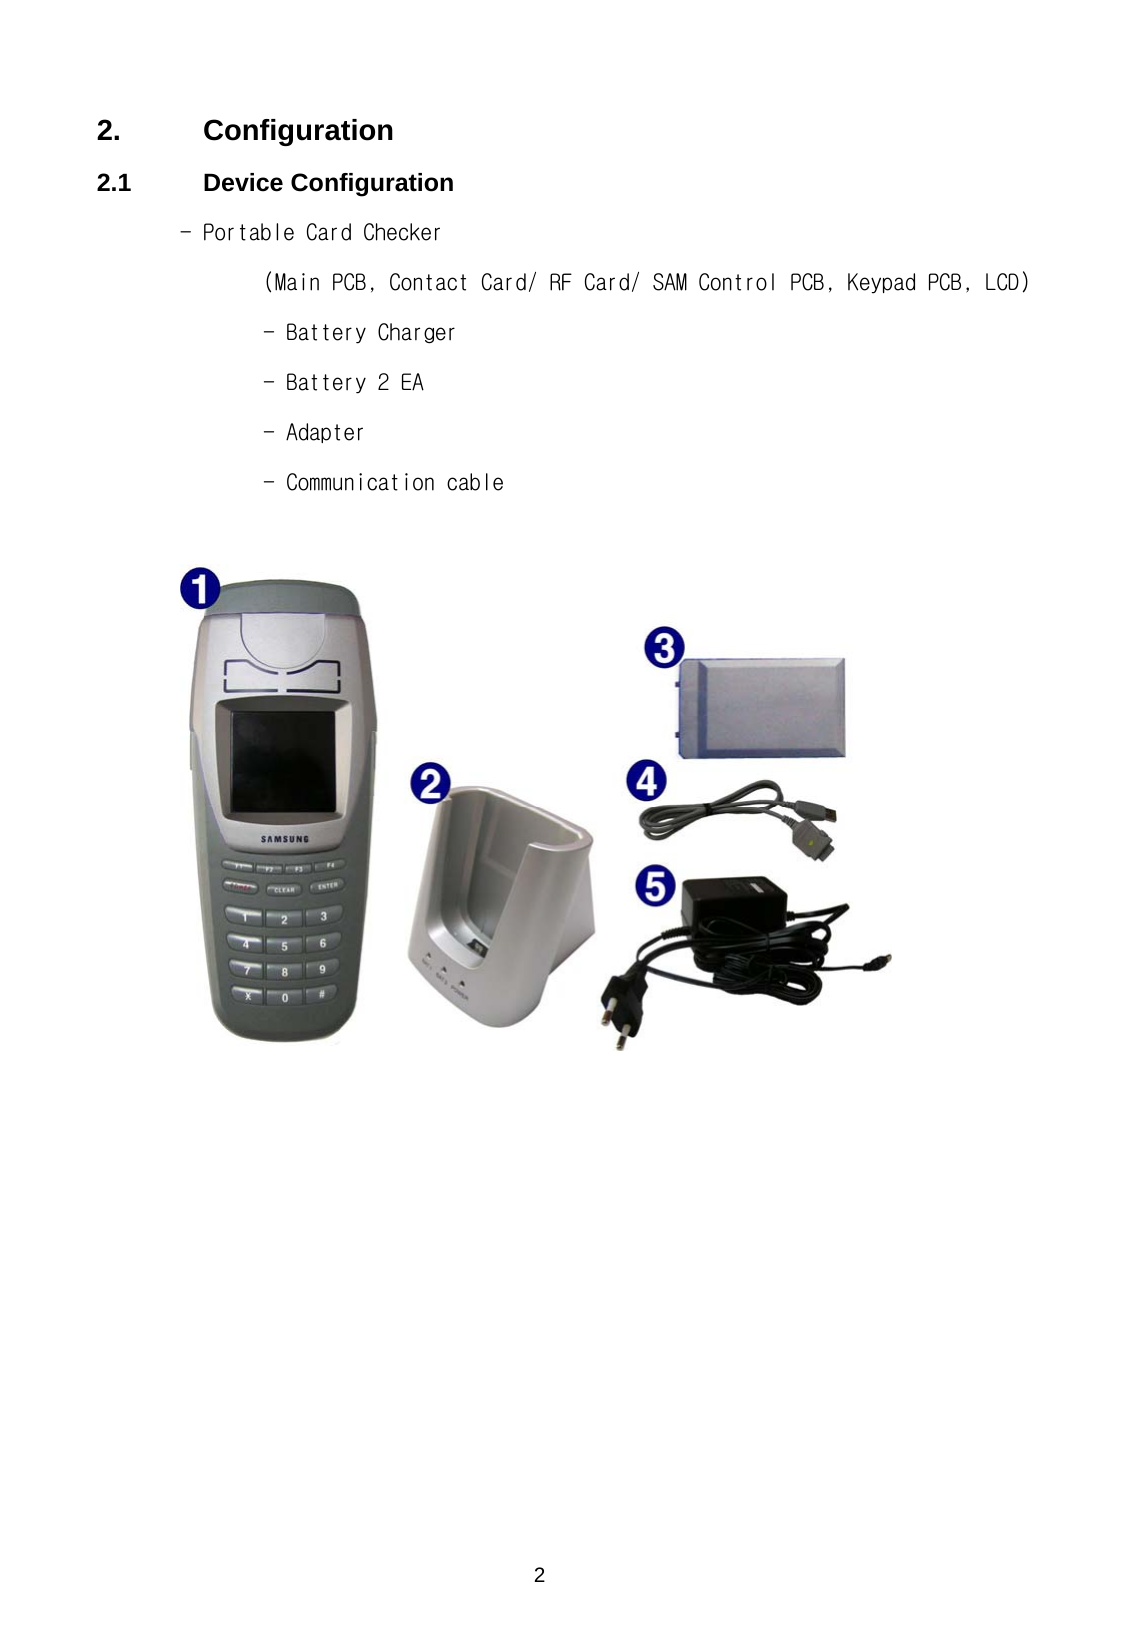 2. Configuration  2    2.1 Device Configuration - Portable Card Checker (Main PCB, Contact Card/ RF Card/ SAM Control PCB, Keypad PCB, LCD)   - Battery Charger    - Battery 2 EA   - Adapter   - Communication cable   